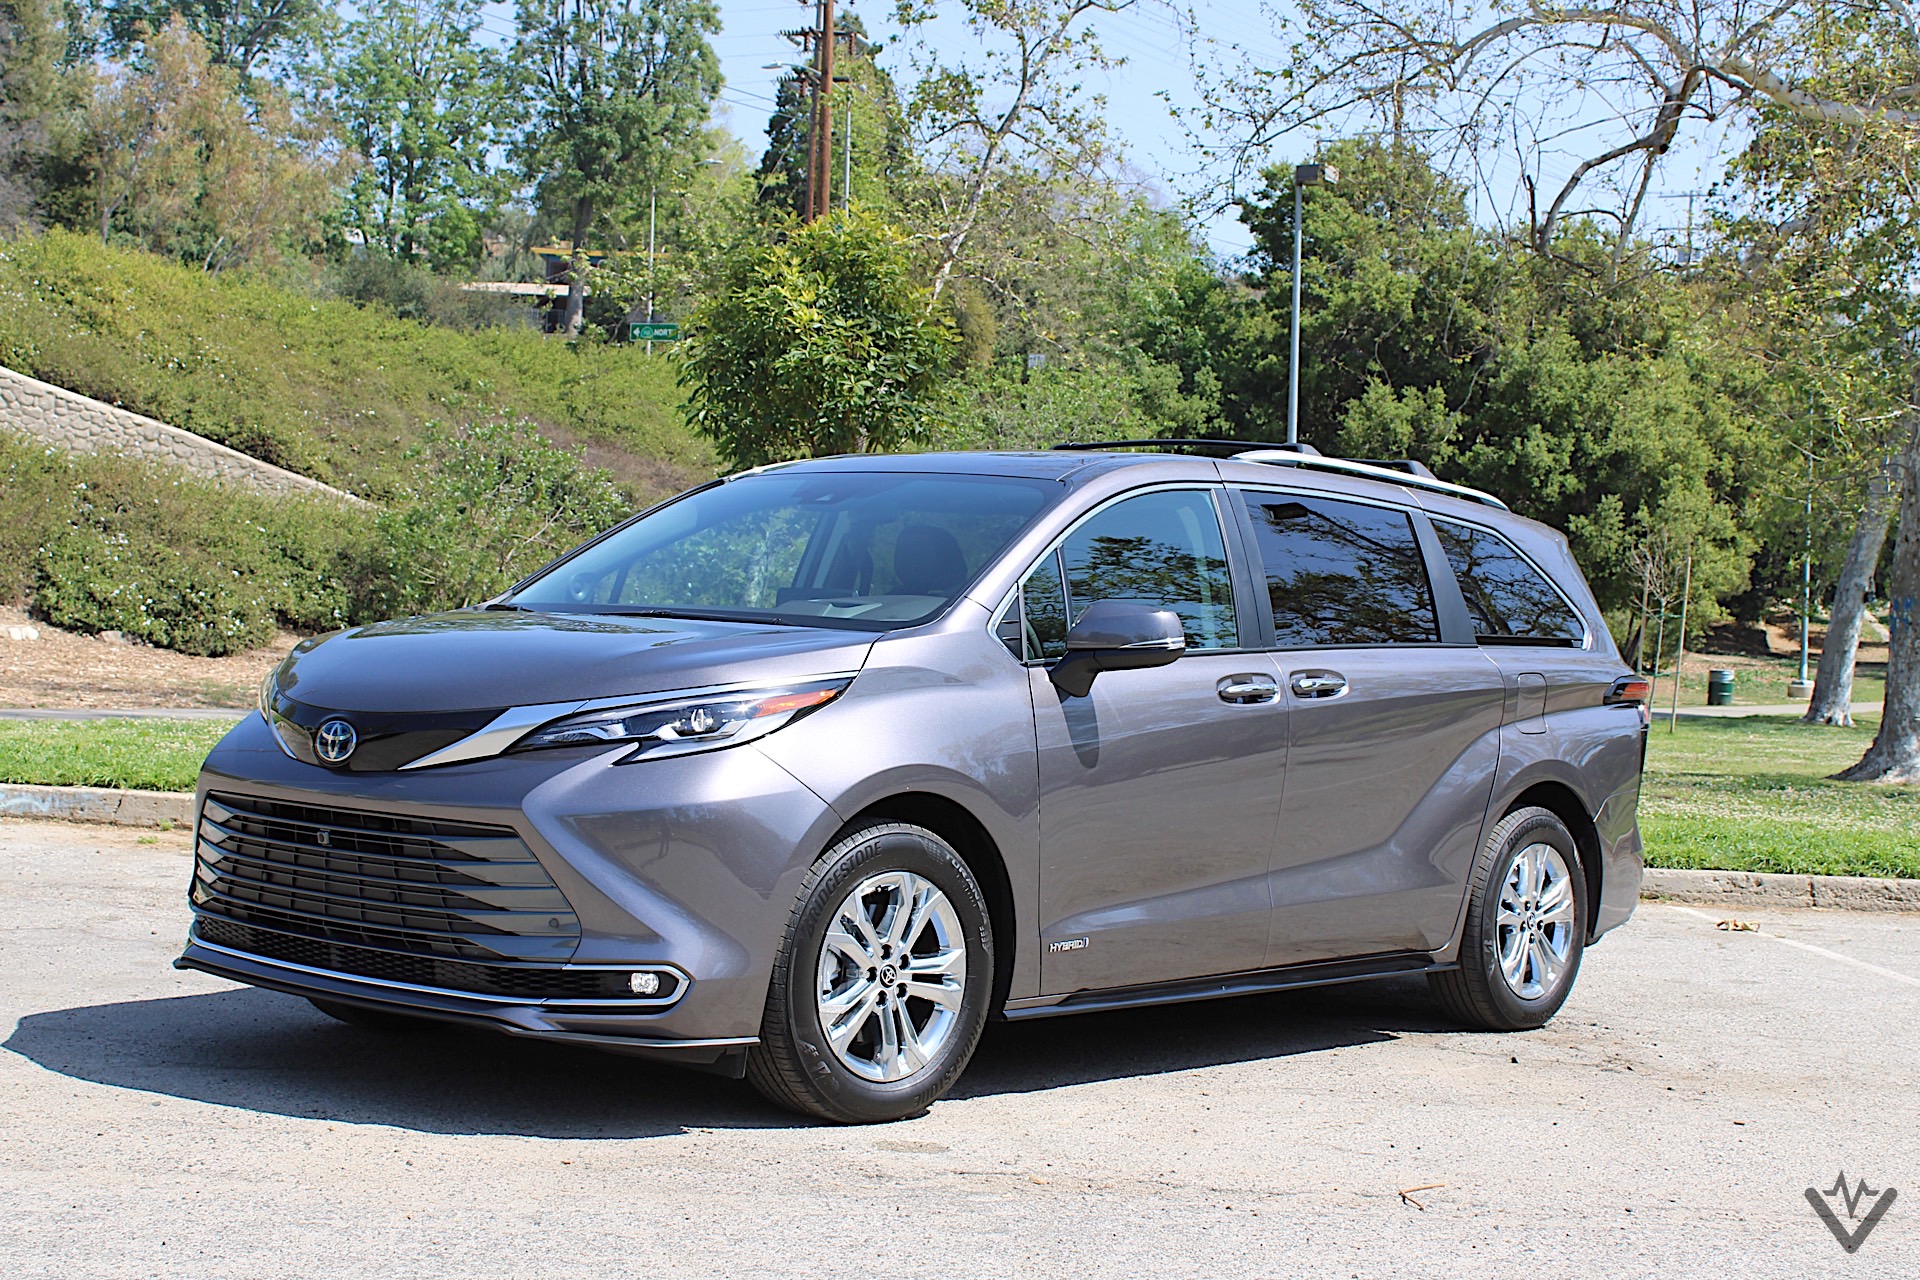 2021 Toyota Sienna review: Hybrid exclusive family hauler - EV Pulse